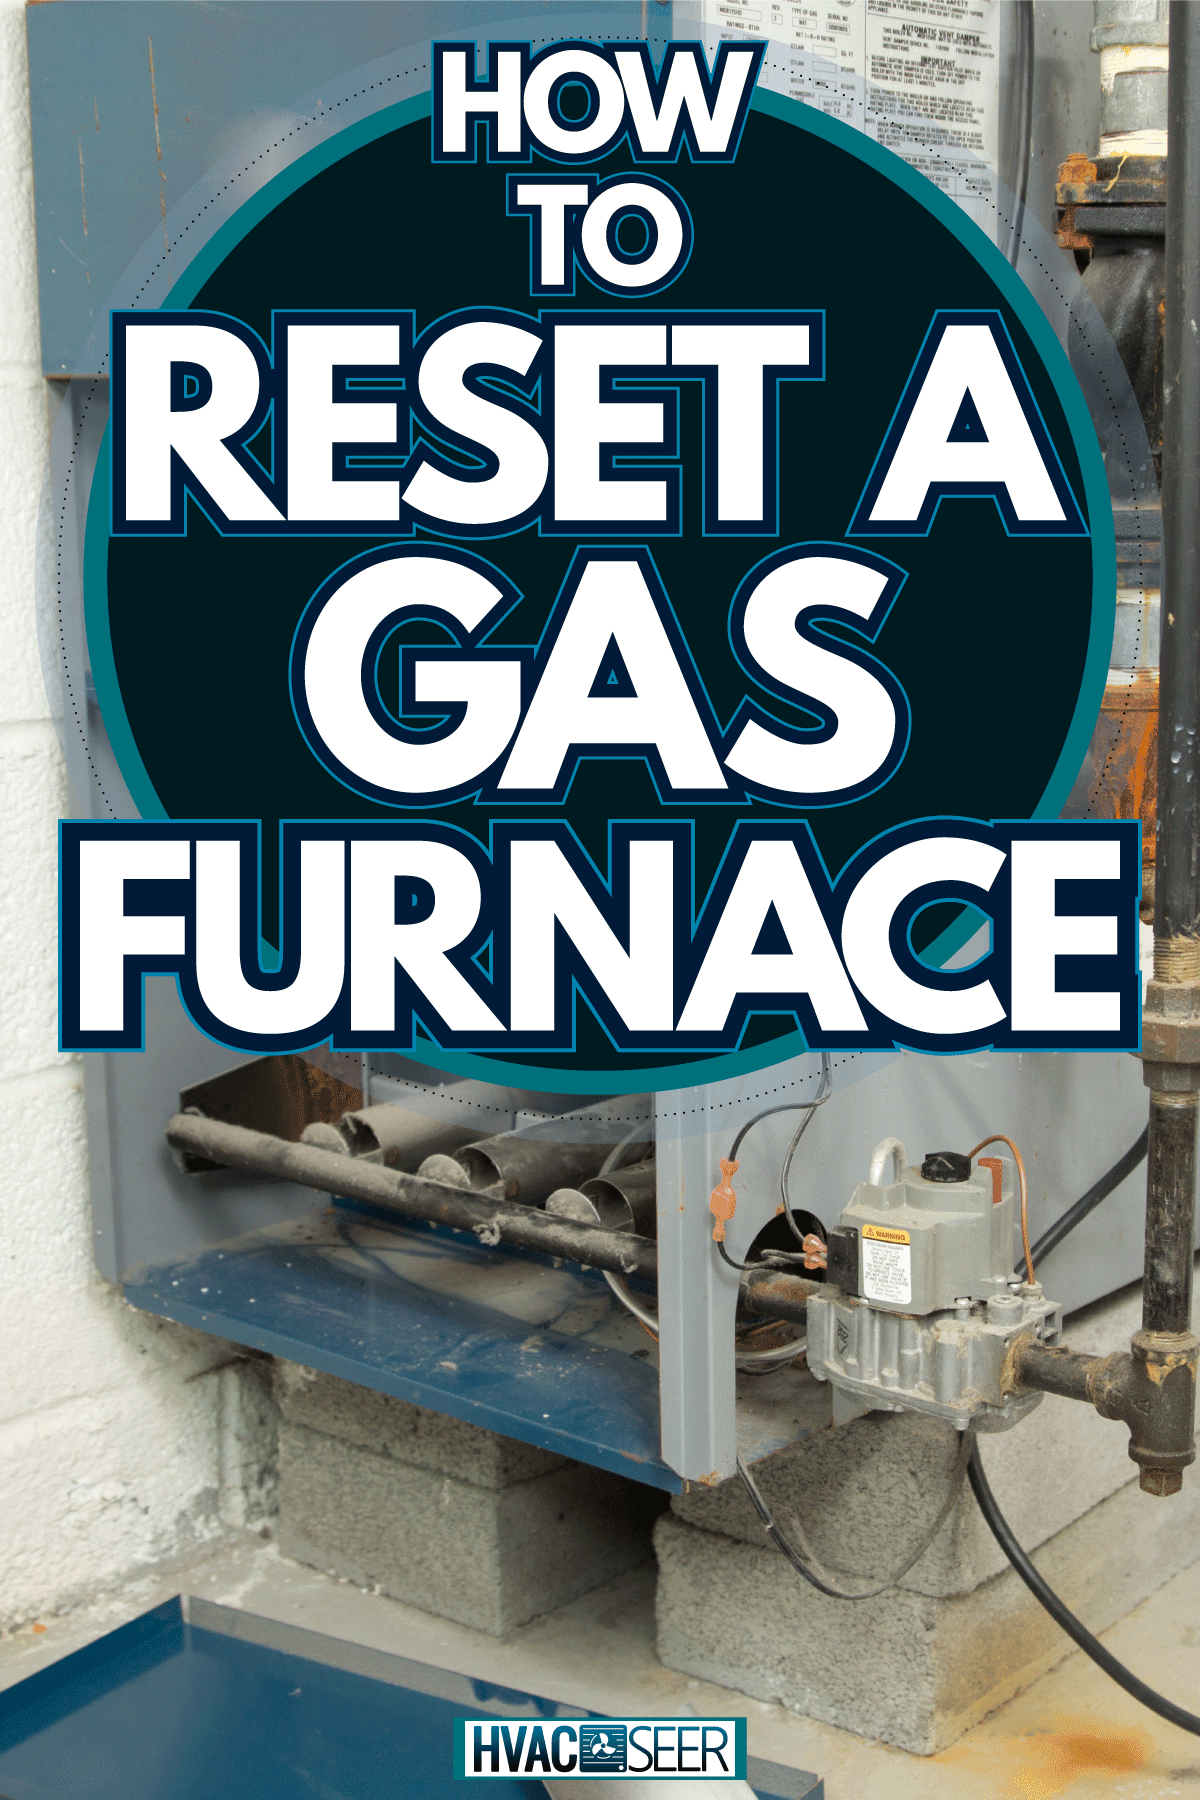 A dirty and old gas furnace ready for cleaning and maintenance, How To Reset A Gas Furnace